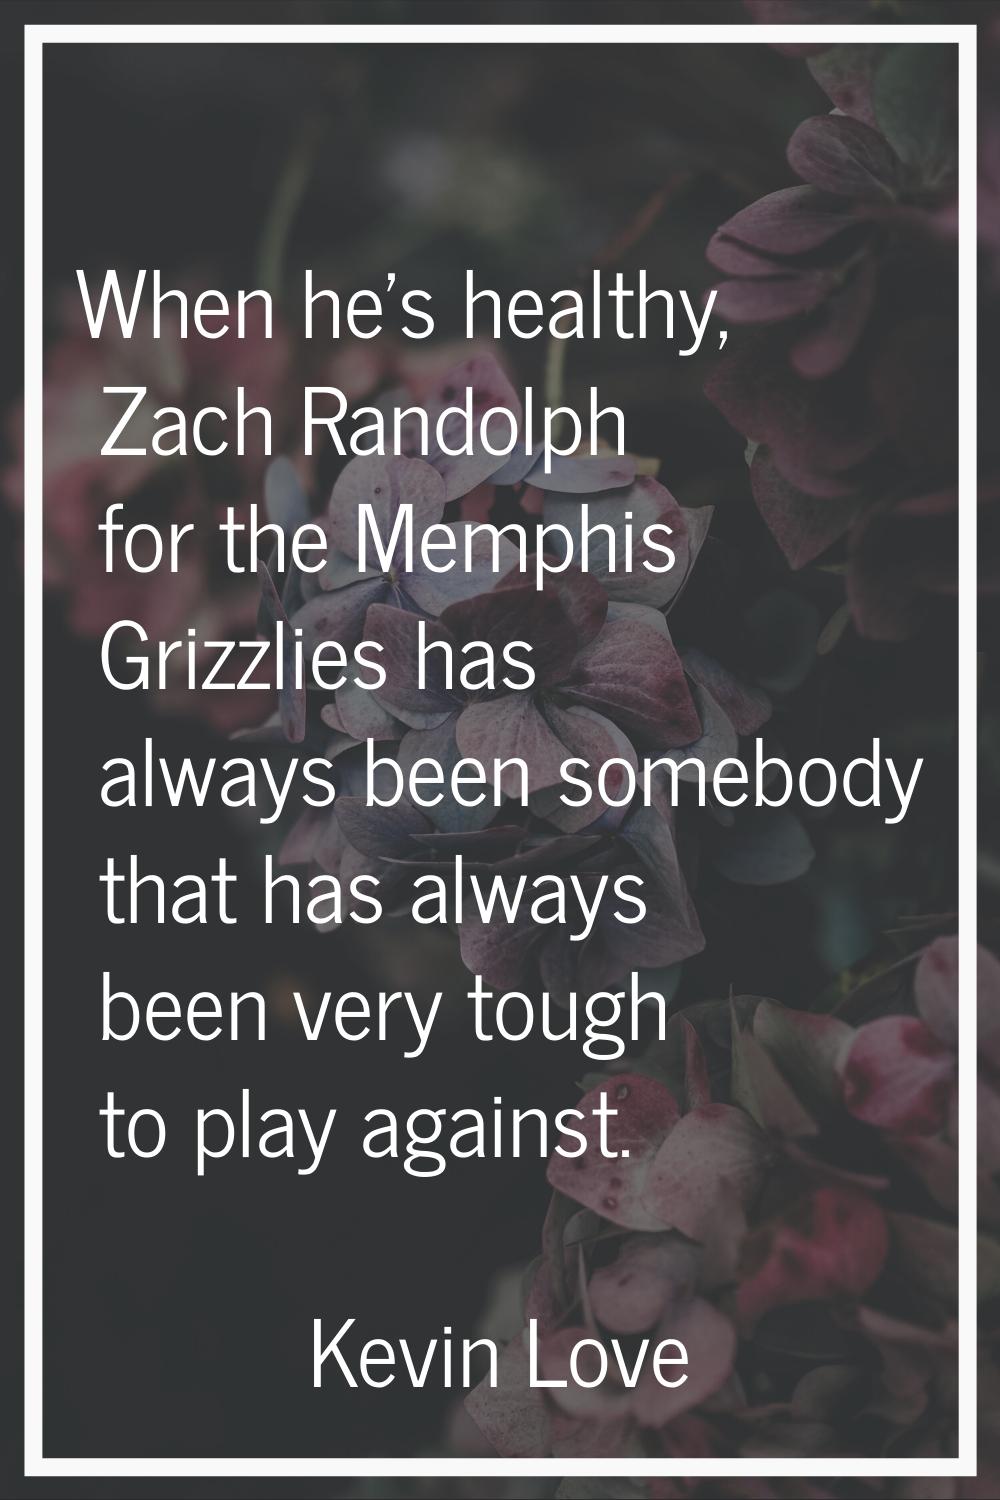 When he's healthy, Zach Randolph for the Memphis Grizzlies has always been somebody that has always